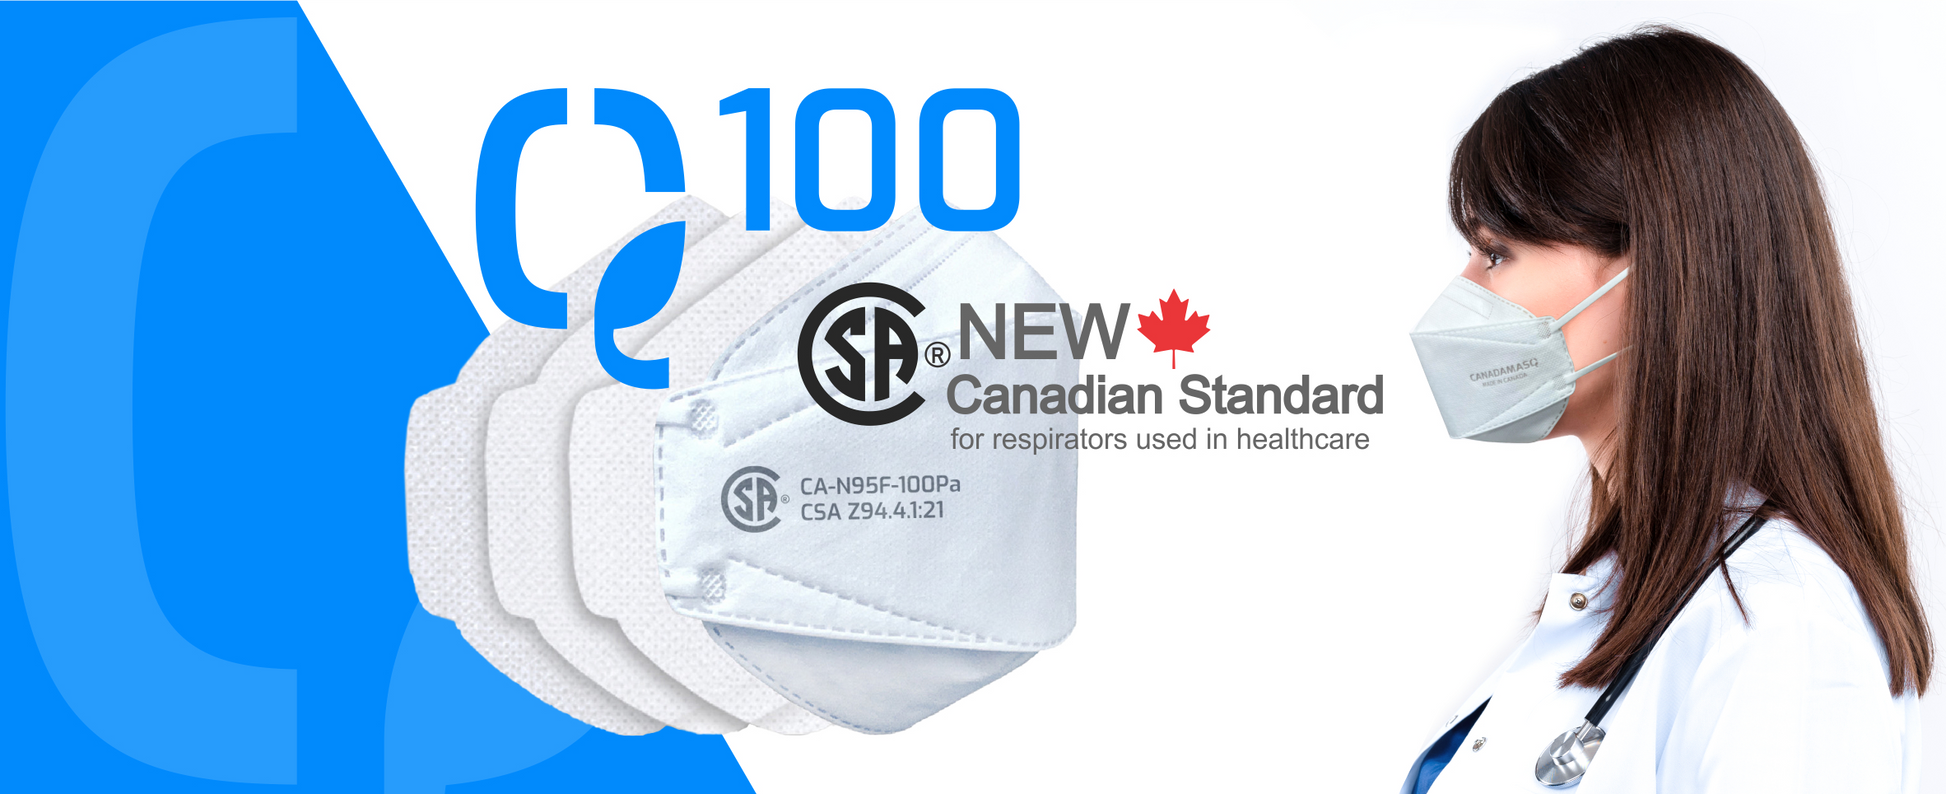 Q100 New Canadian Standard for respirator used in healthcare Up to 4x more breathable